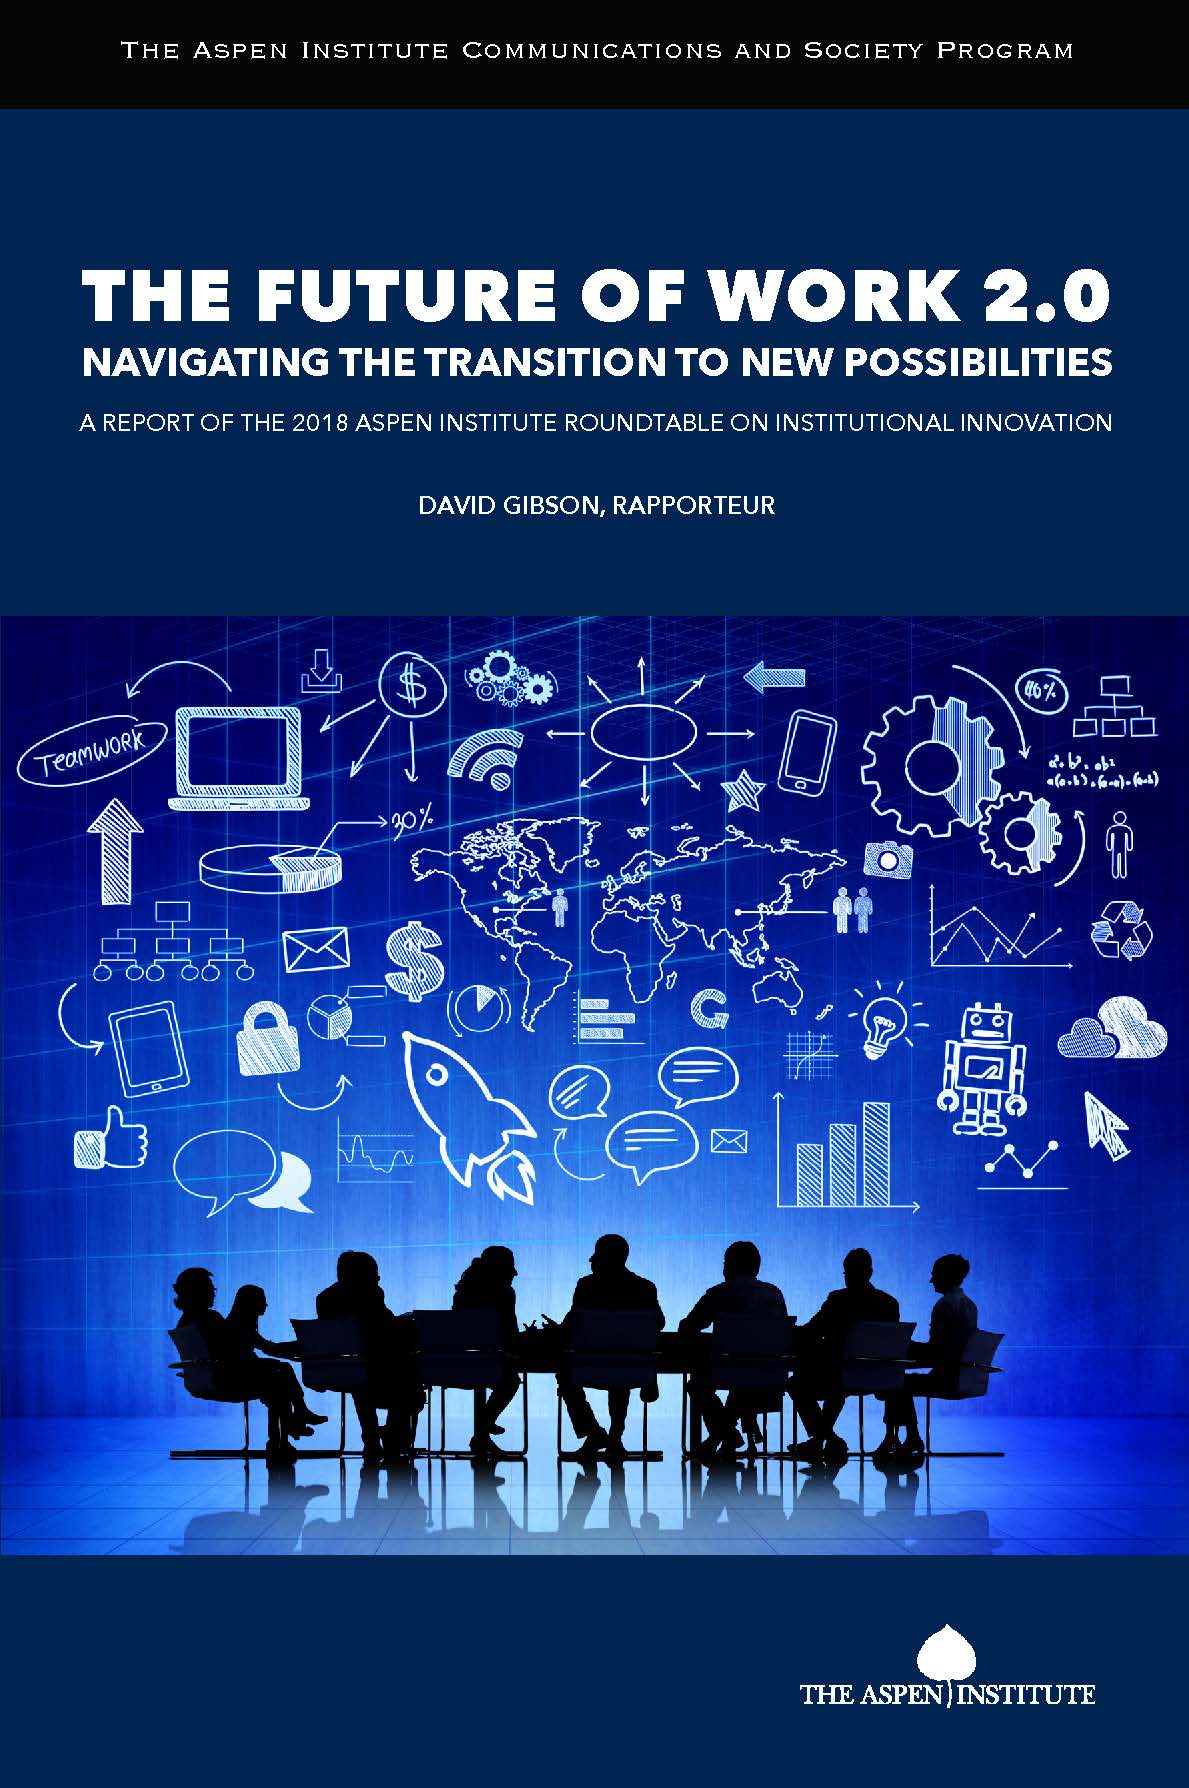 The Future of Work 2.0: Navigating the Transition to New Possibilities